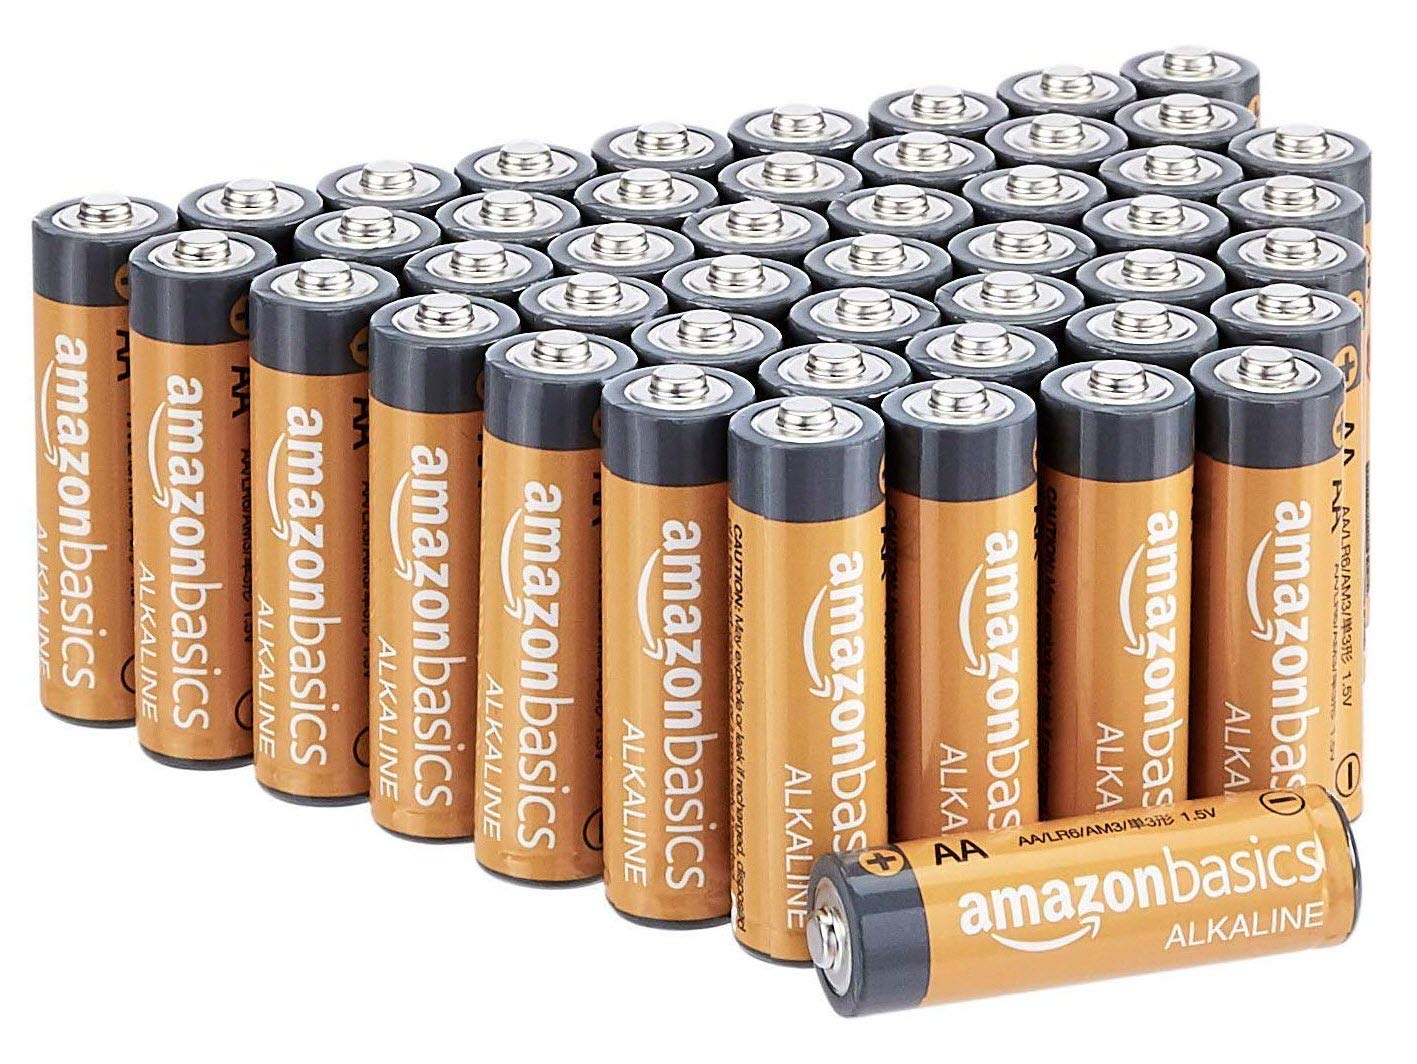 Amazon Basics 8-Pack AA Rechargeable Batteries, Pre-Charged & 48 Pack AA High-Performance Alkaline Batteries, 10-Year Shelf Life, Easy to Open Value Pack